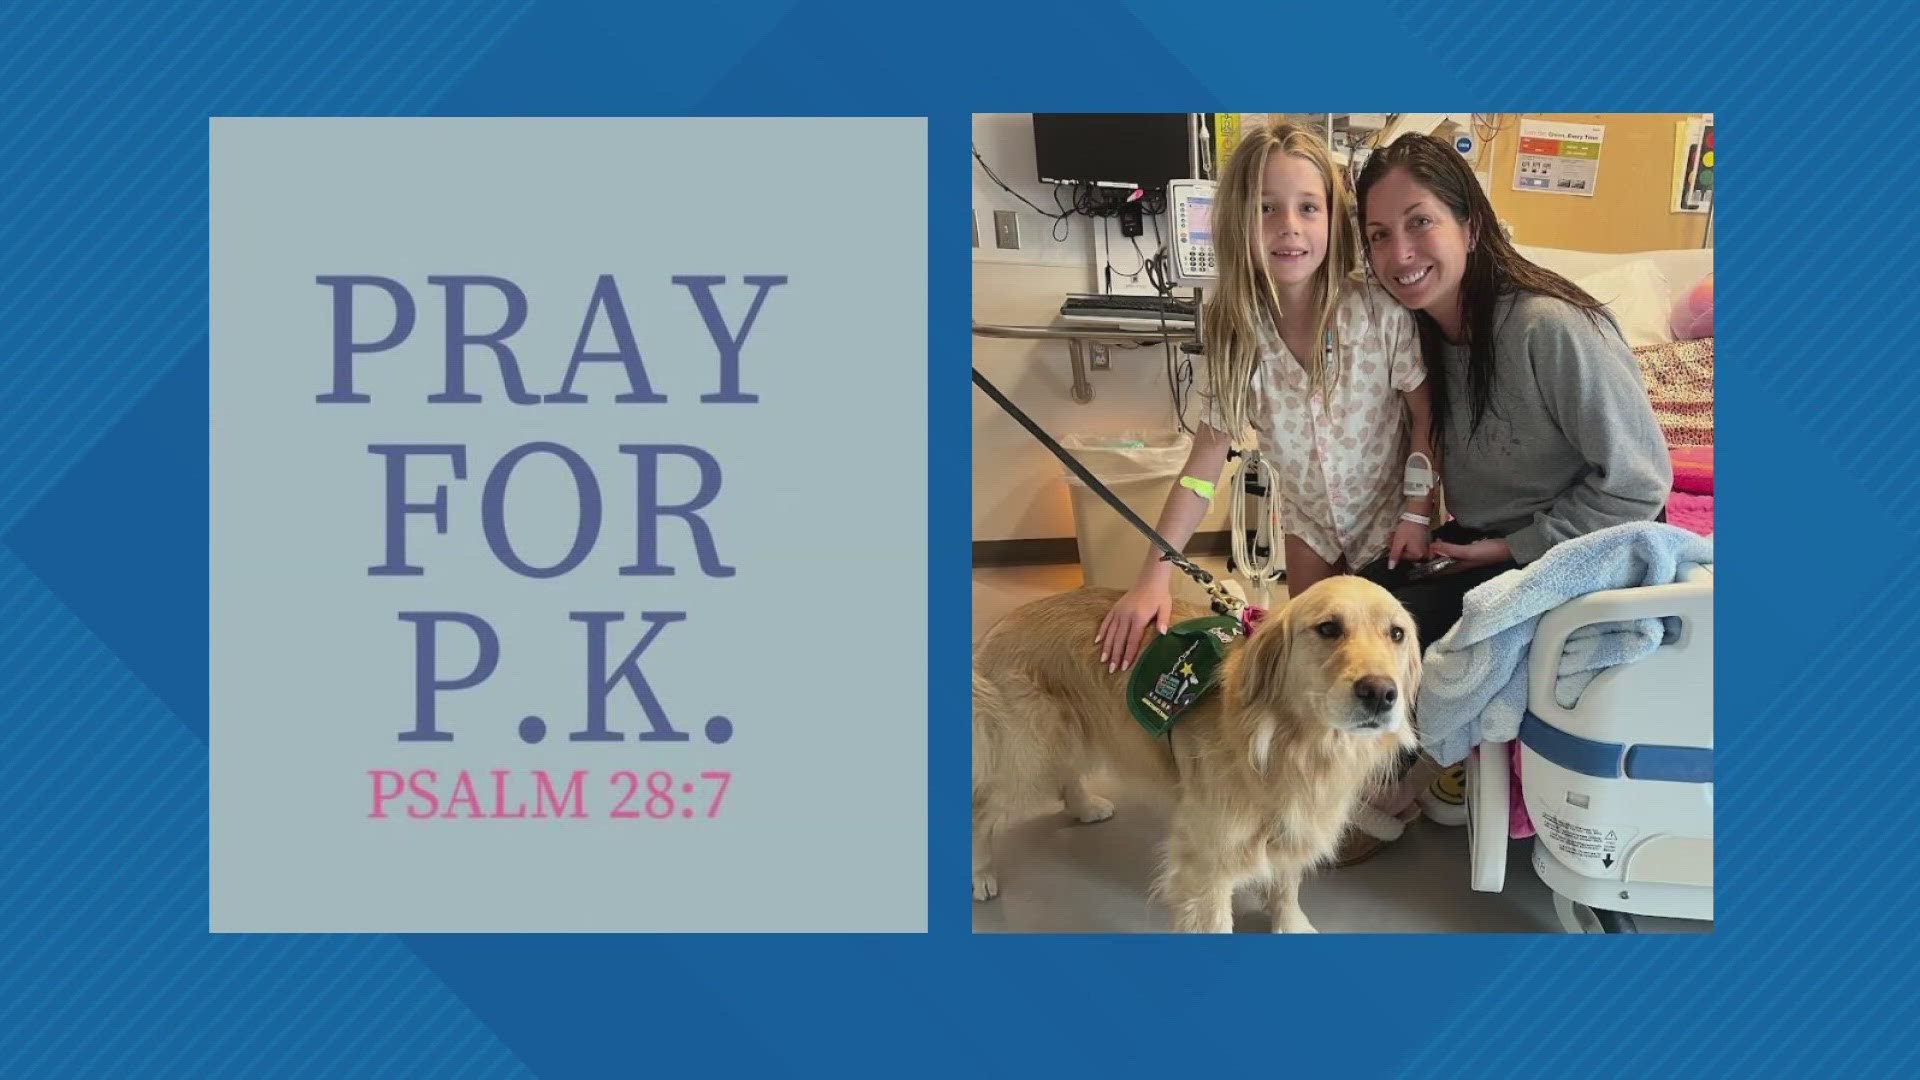 PK Karrenbrock's health journey has gone viral. Her family posted on Facebook asking for prayers, and now the community is rallying behind them.